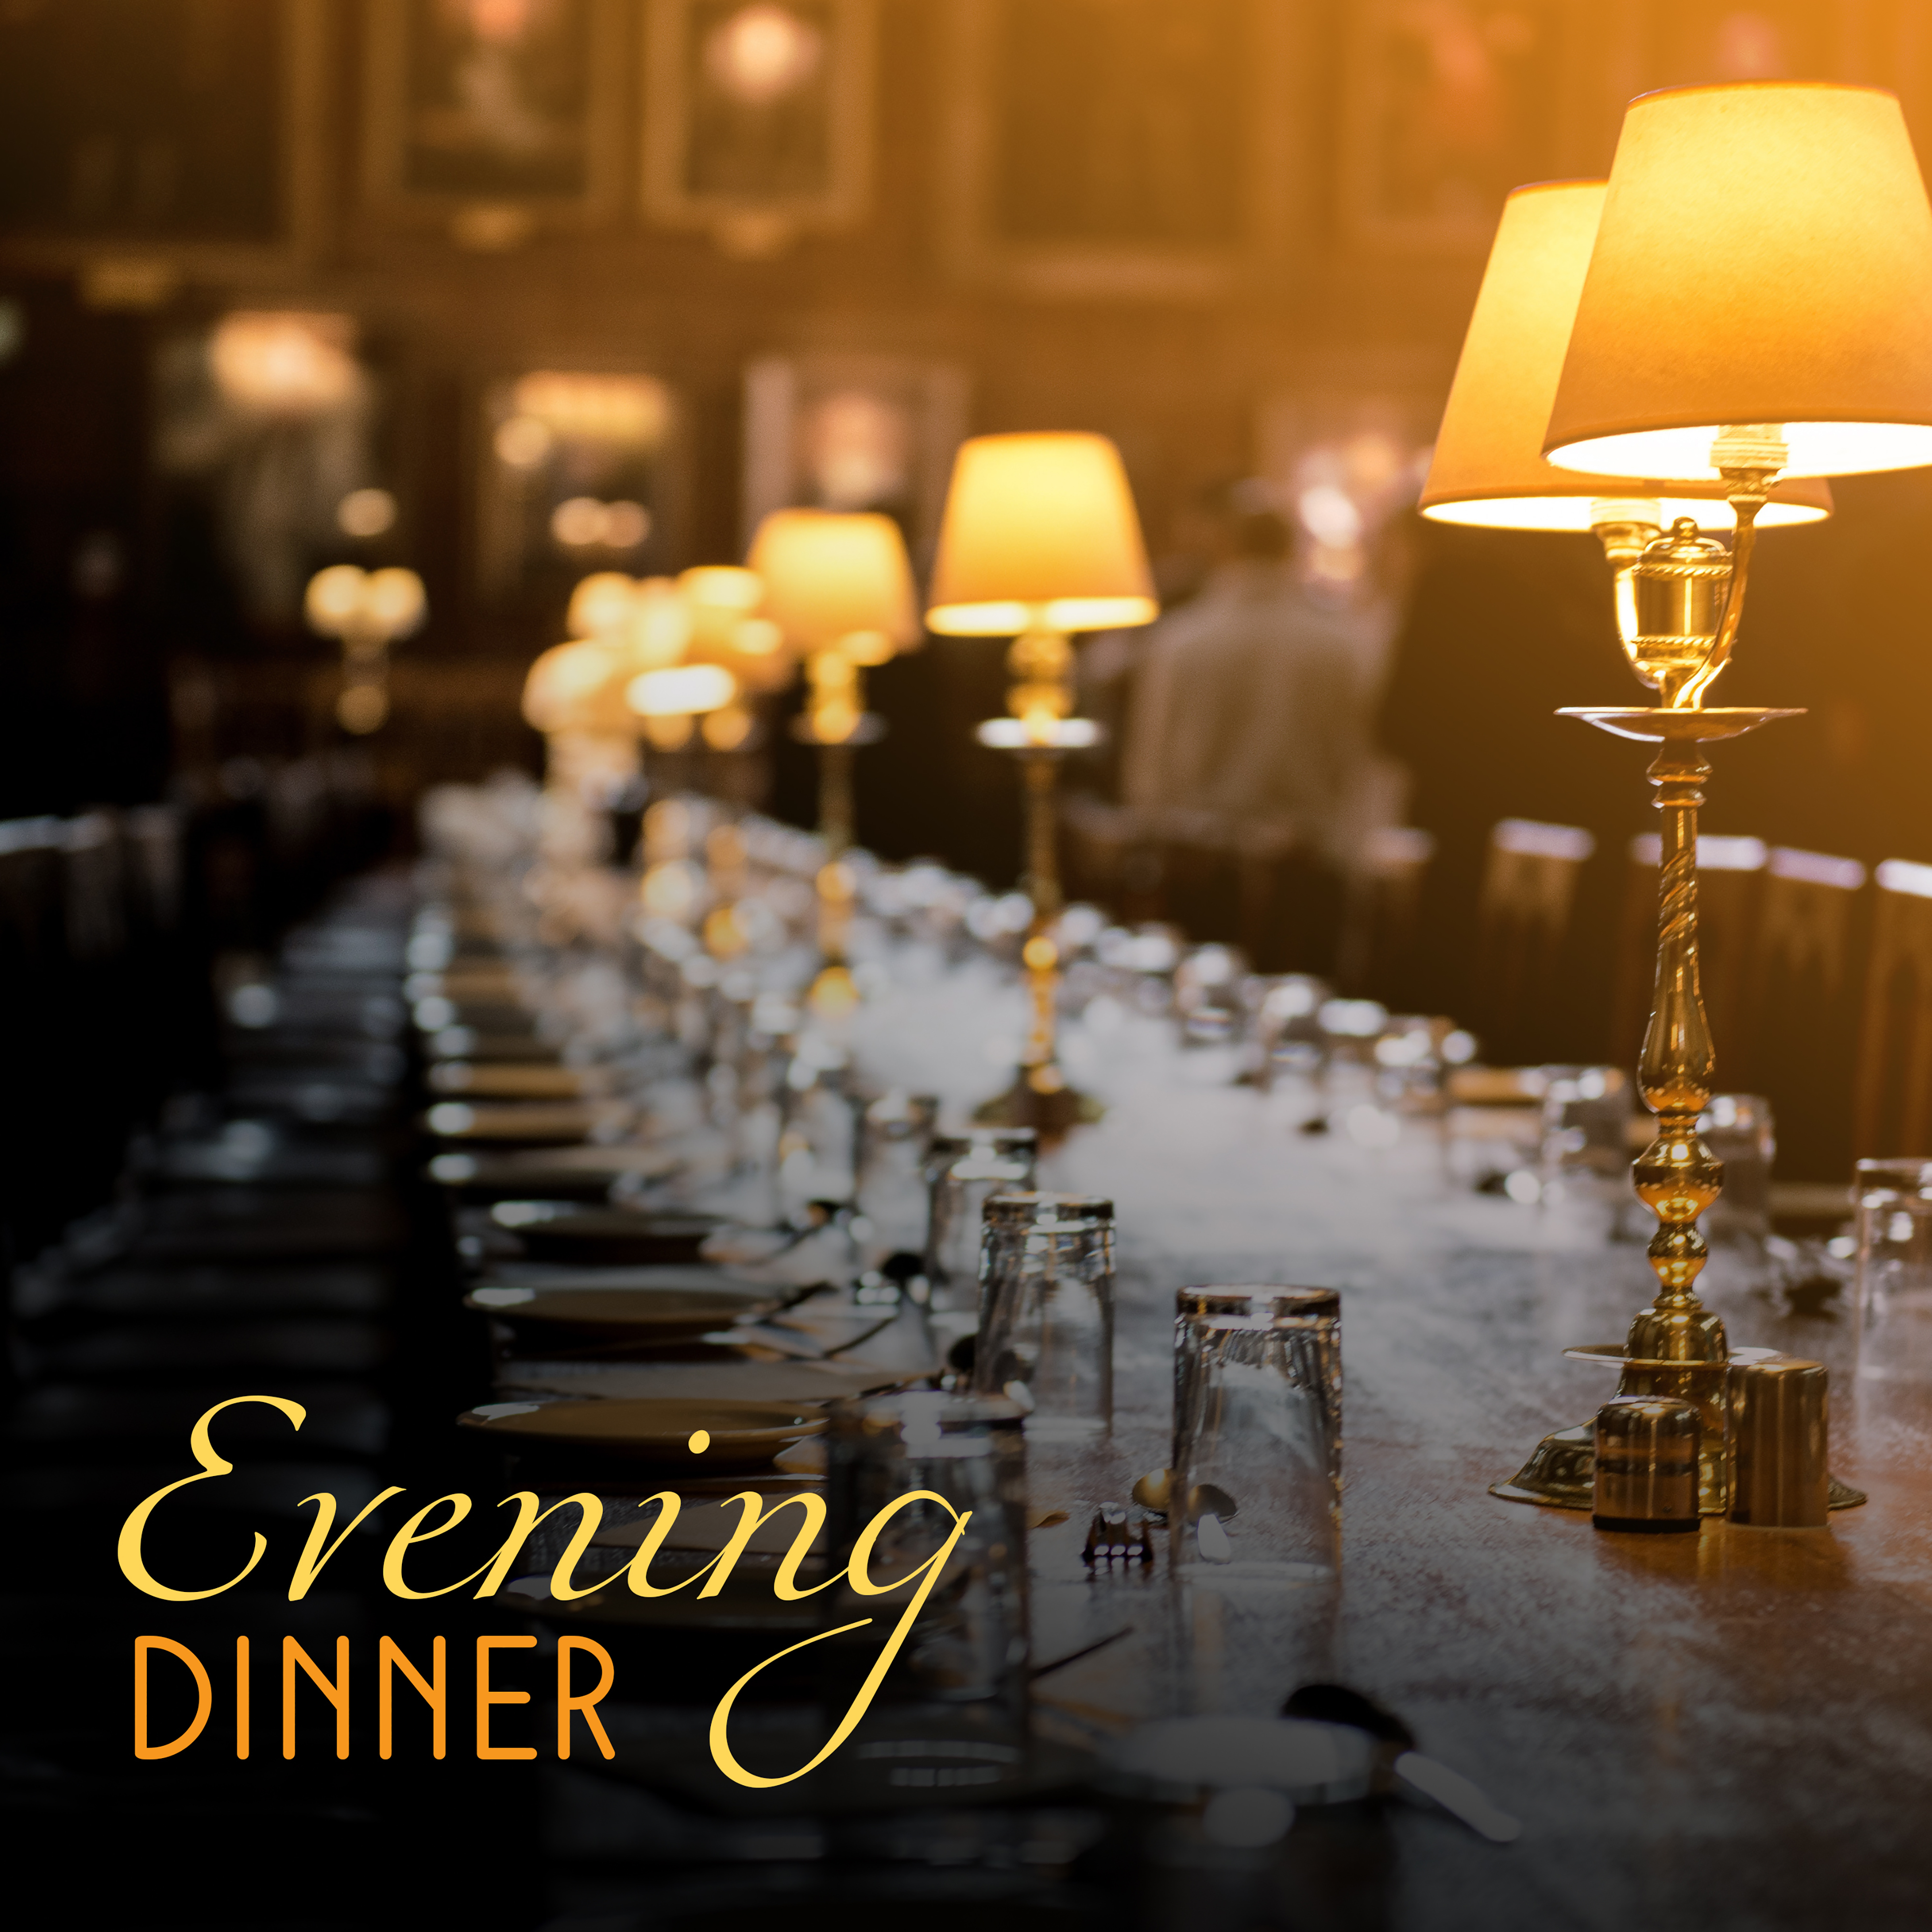 Evening Dinner  Soft Piano Bar, Jazz for Restaurant, Smooth Jazz, Piano Cafe, Rest with Jazz